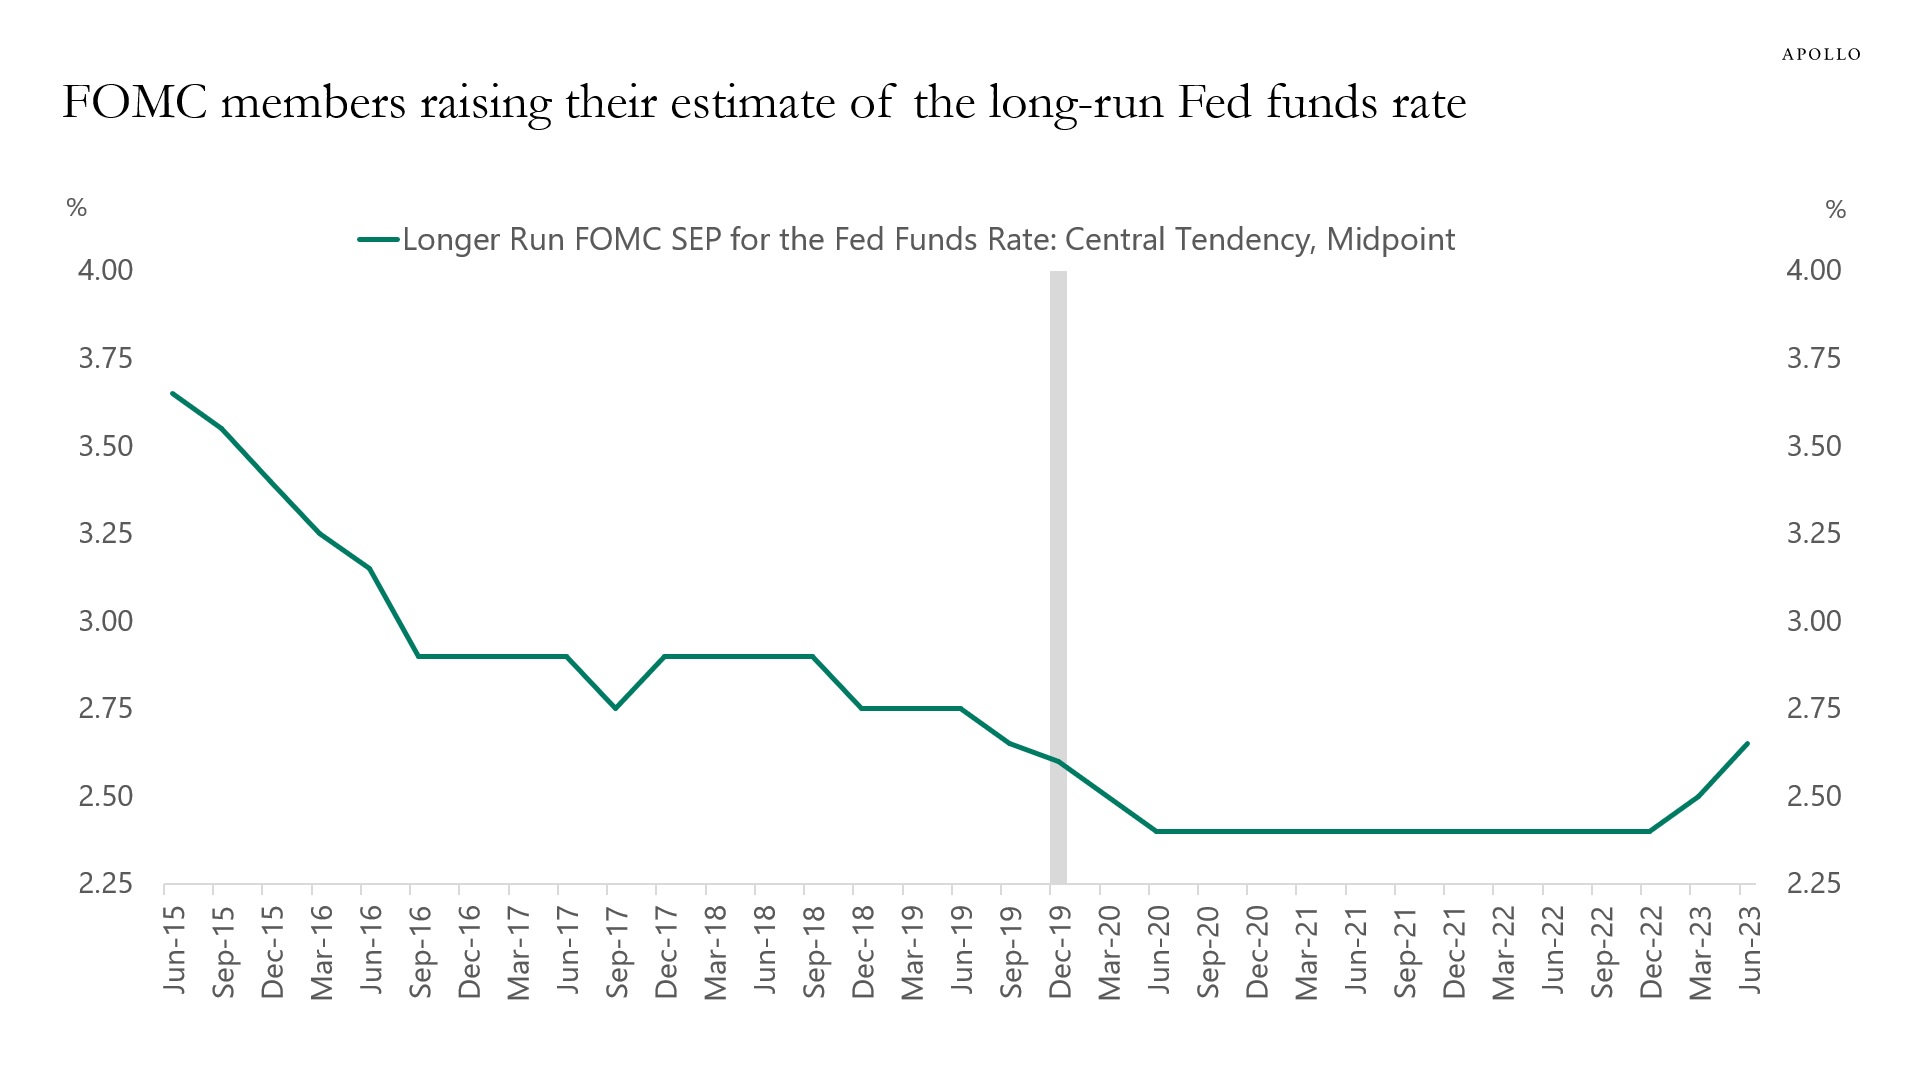 Fed members are increasing their estimates of the Fed funds rate